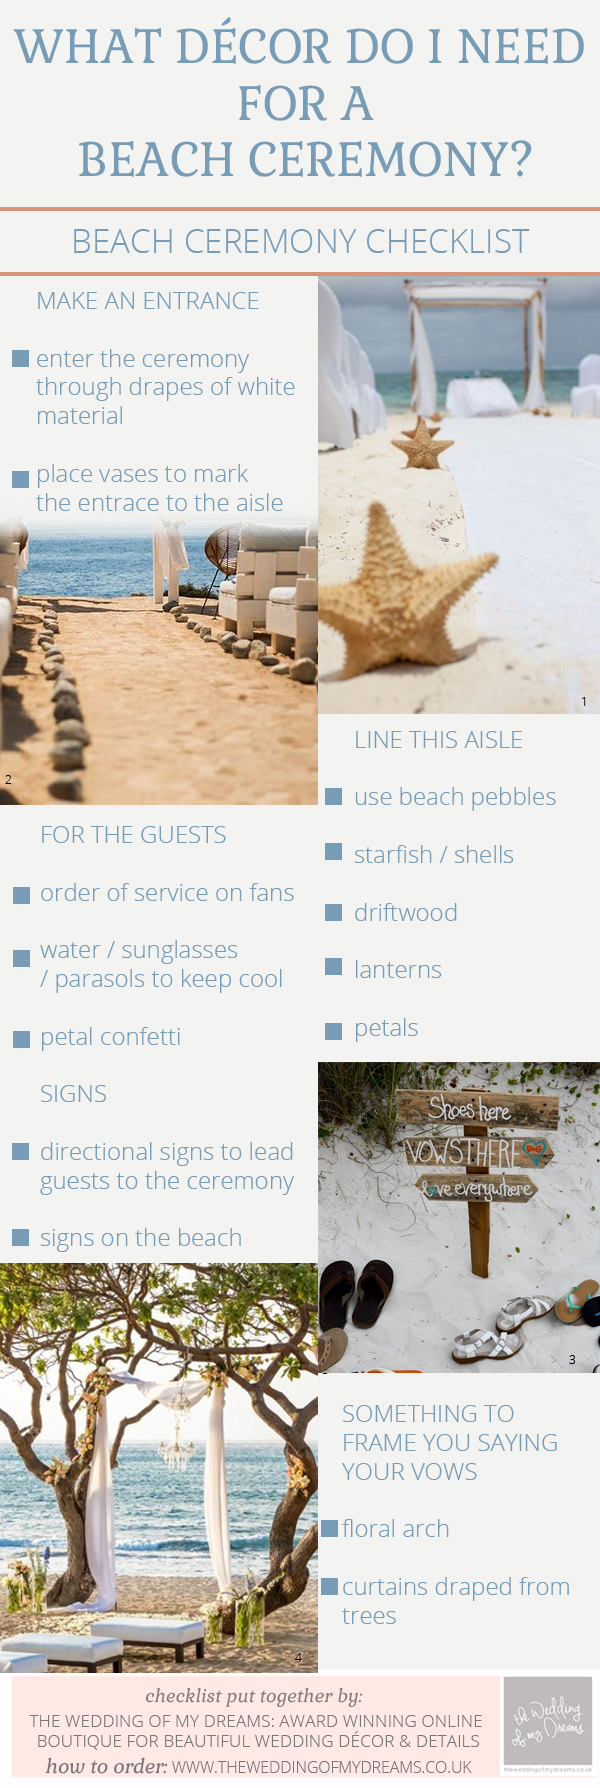 What Decorations Do I Need For A Beach Wedding Ceremony – Checklist